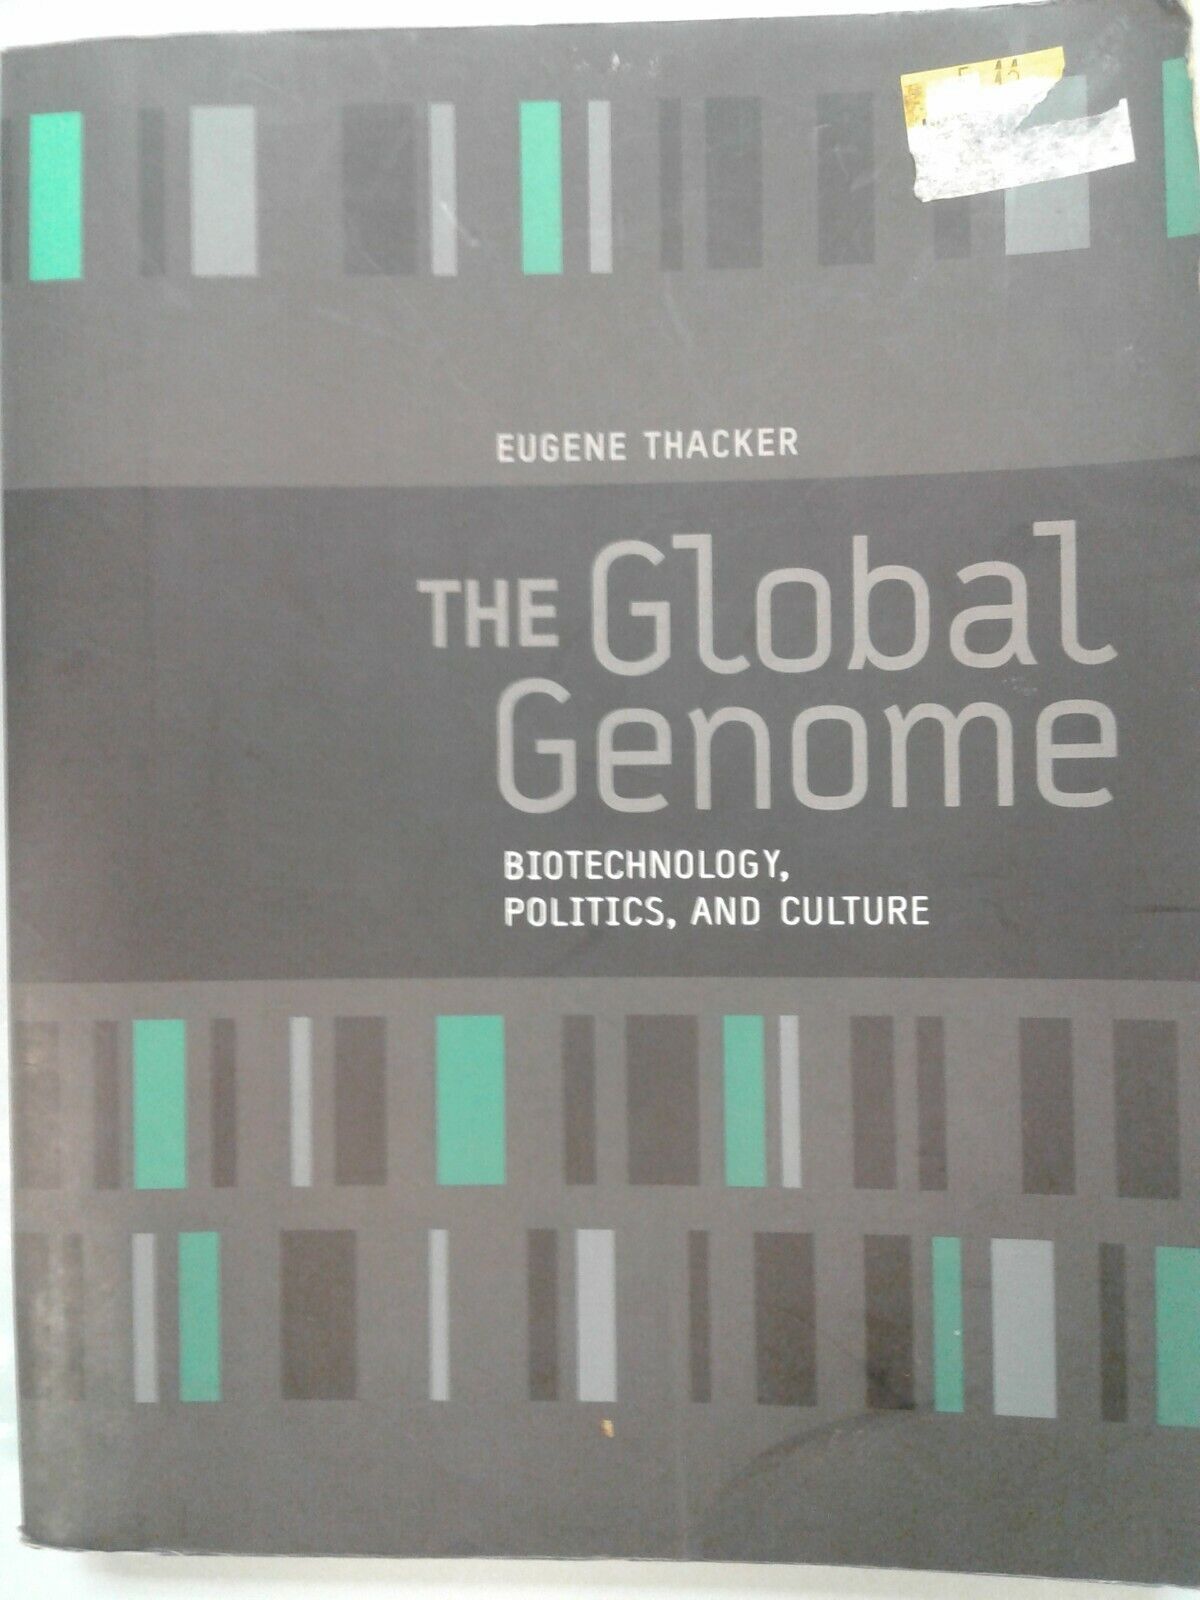 Leonardo Book Ser.: The Global Genome : Biotechnology, Politics, and Culture by…